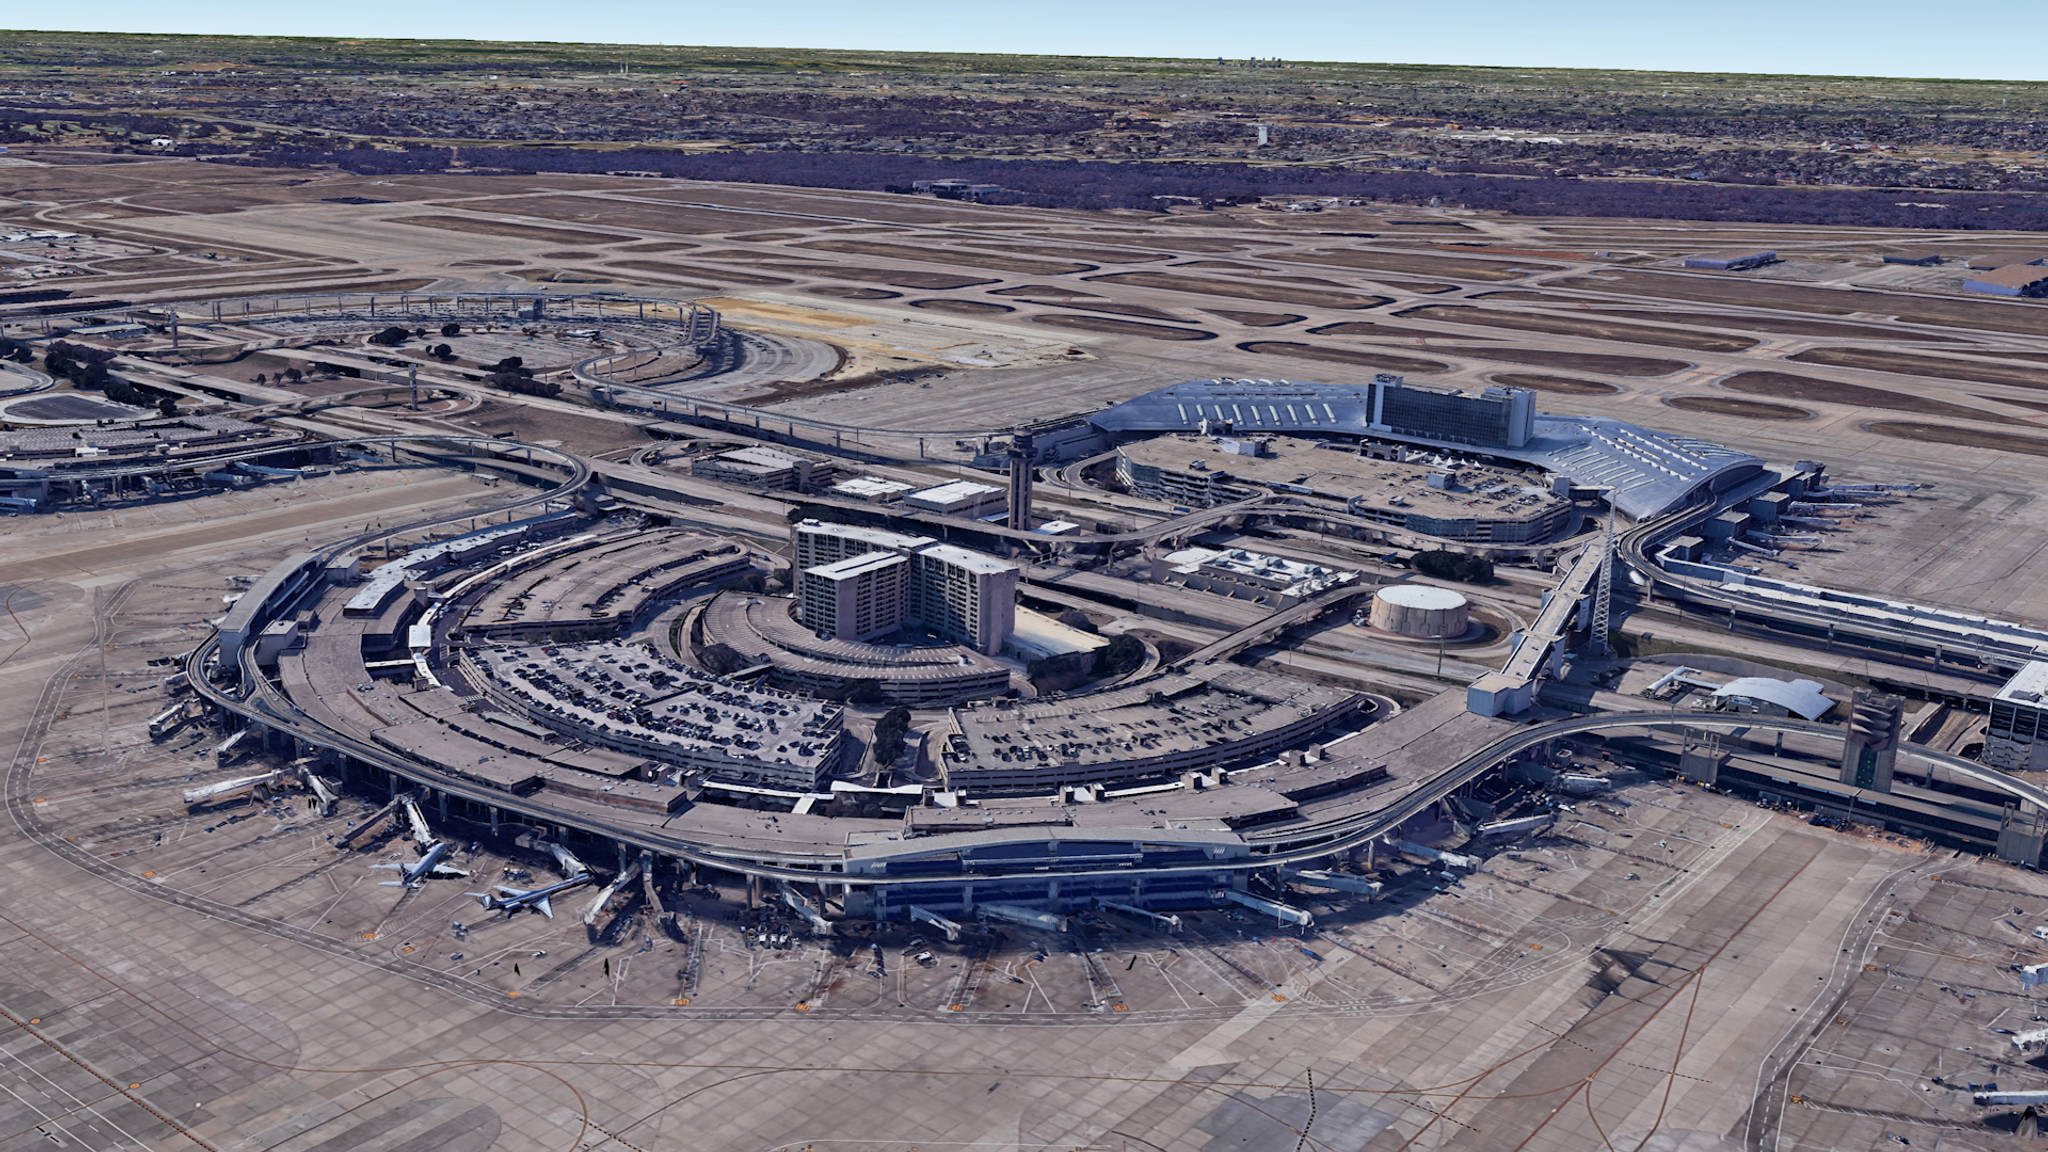  Aerial View of Dallas Airport Parking